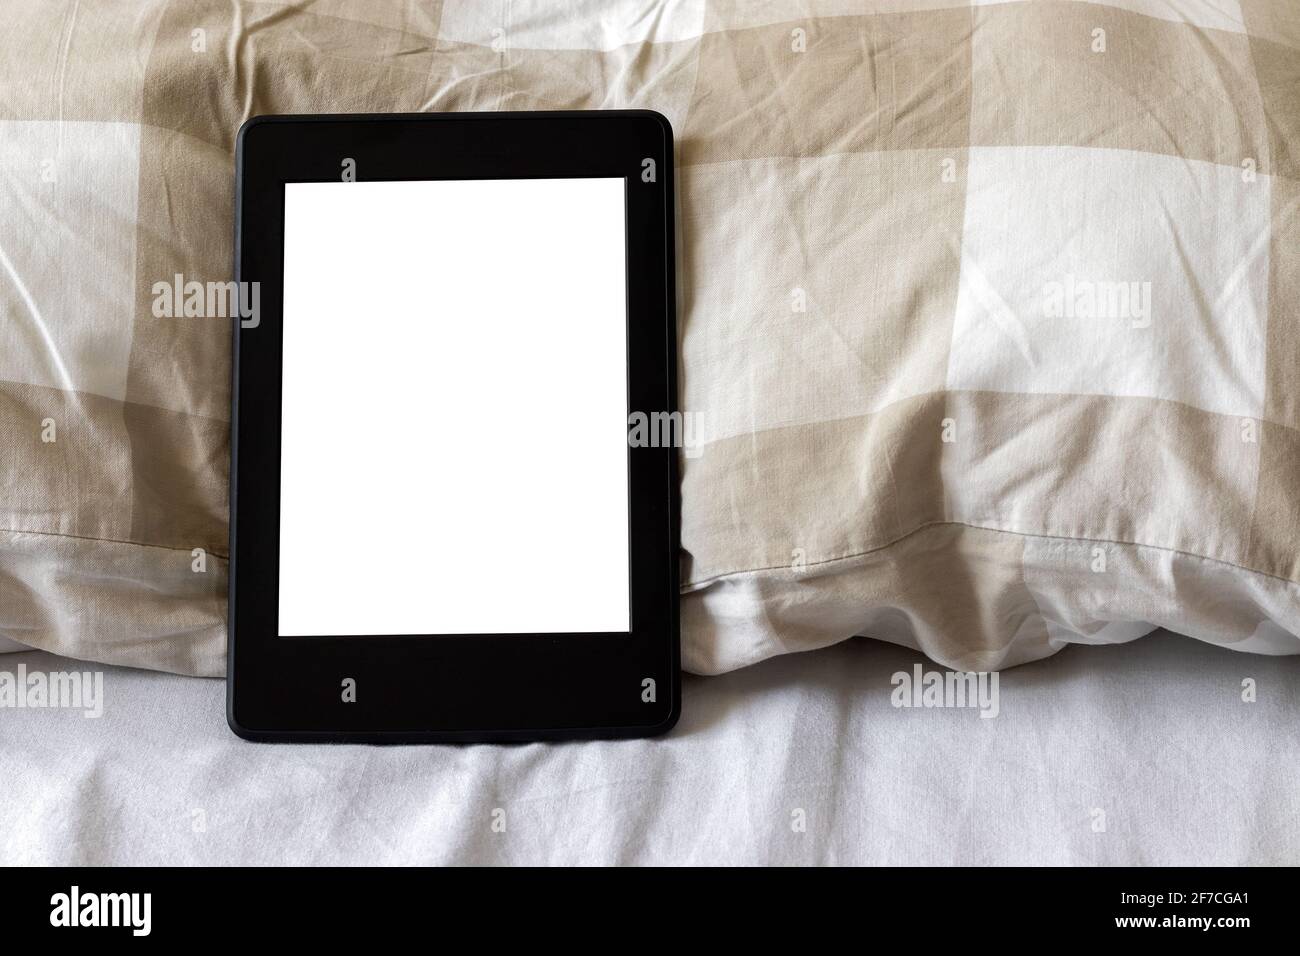 A modern black electronic book with a blank screen on a white and beige bed. Mockup tablet on bedding. Closeup view Stock Photo